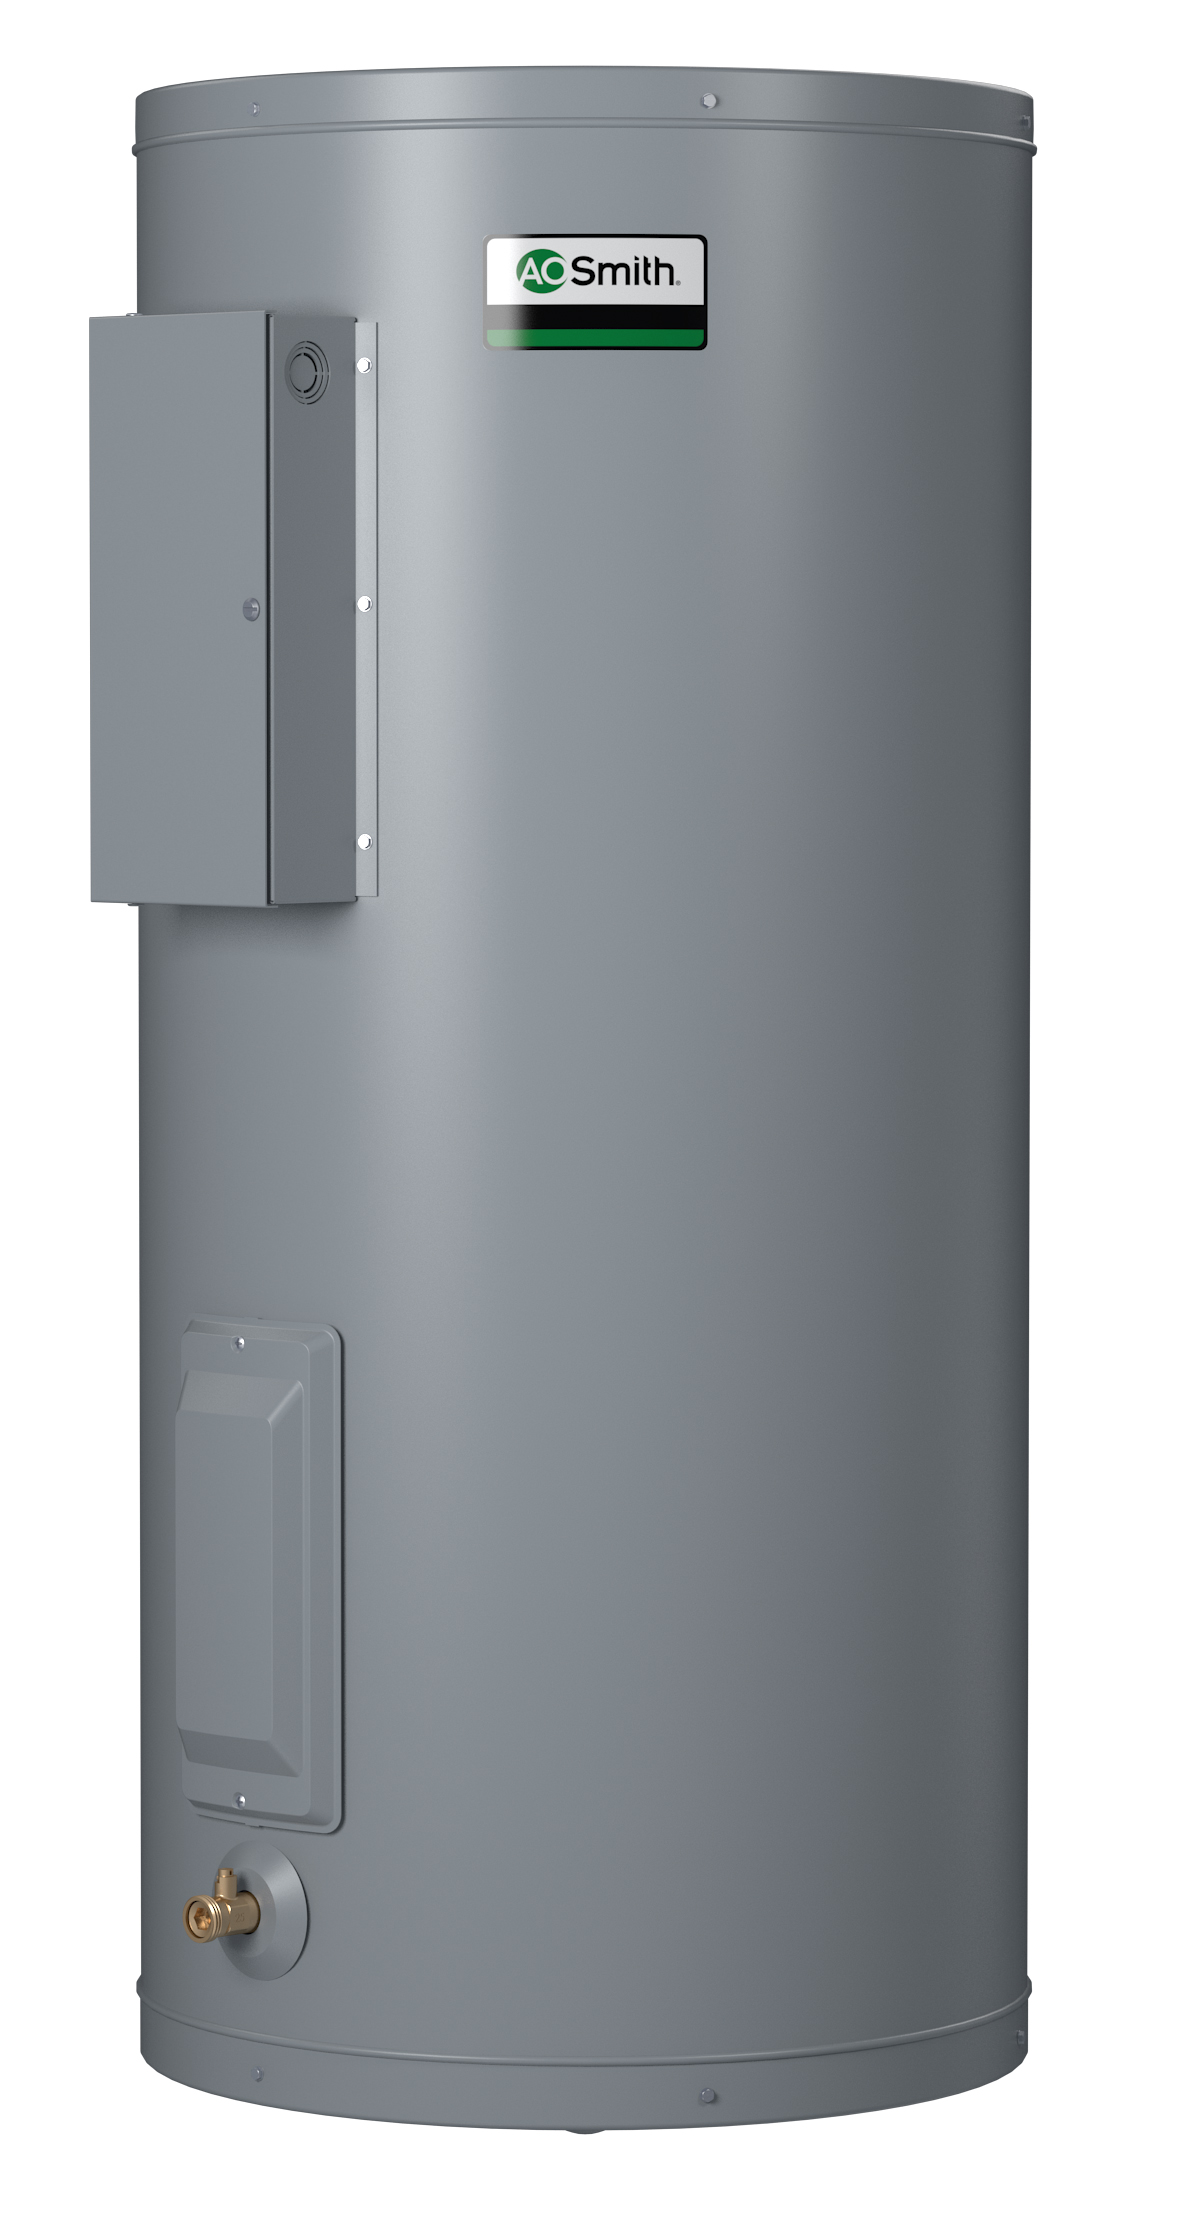 AO SMITH DEL-40D: 38 GALLONS, 4.0KW, 480 VOLT, 3 PHASE, (2-4000 WATT ELEMENTS, NON-SIMULTANEOUS WIRING), DURA-POWER,LIGHT DUTY COMMERCIAL ELECTRIC WATER HEATER